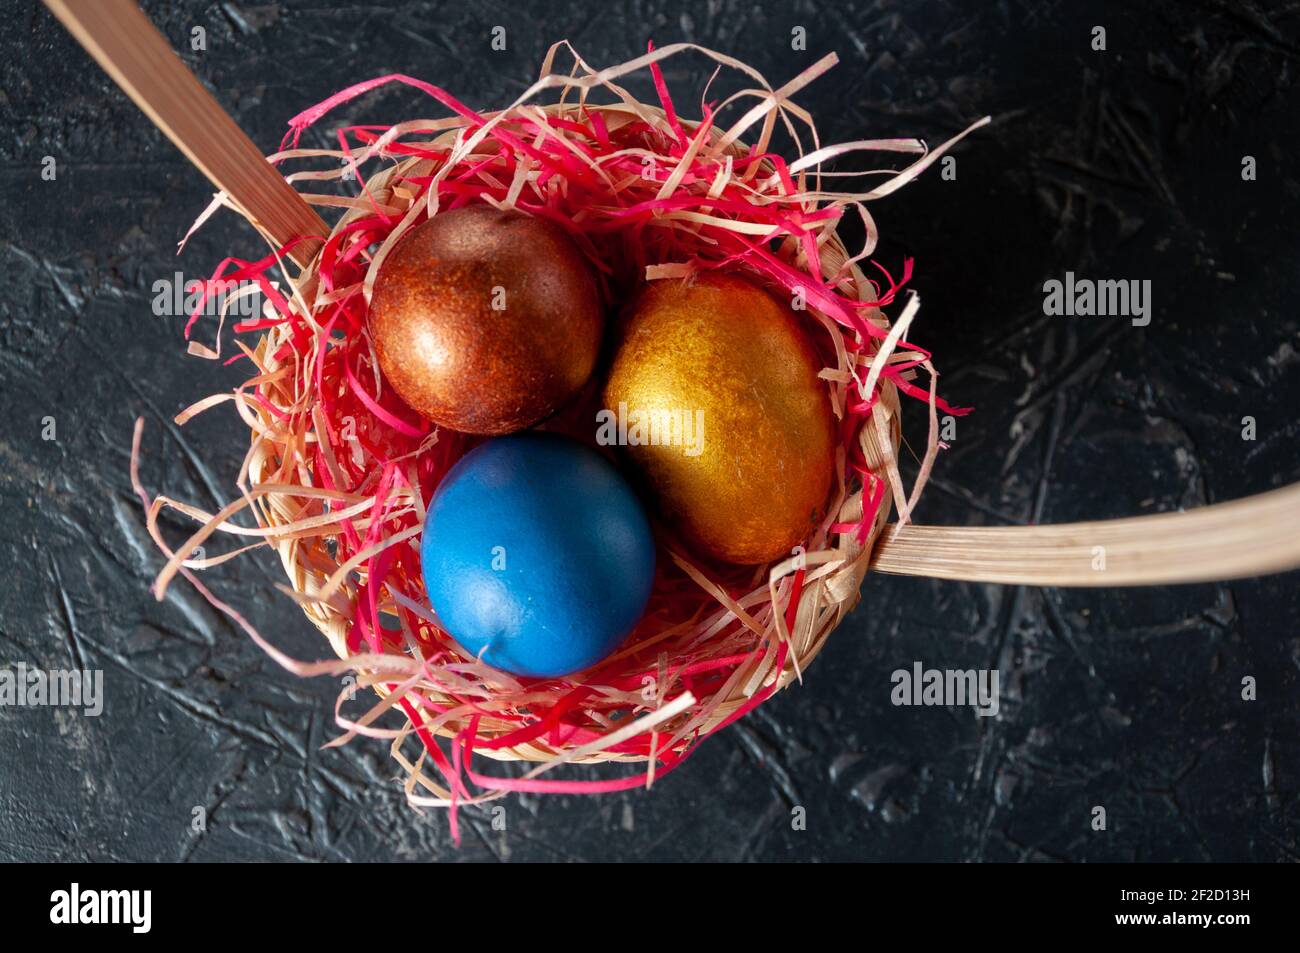 Homemade multicolored painted Easter eggs on colorful straw in a wicker basket on a dark background Stock Photo